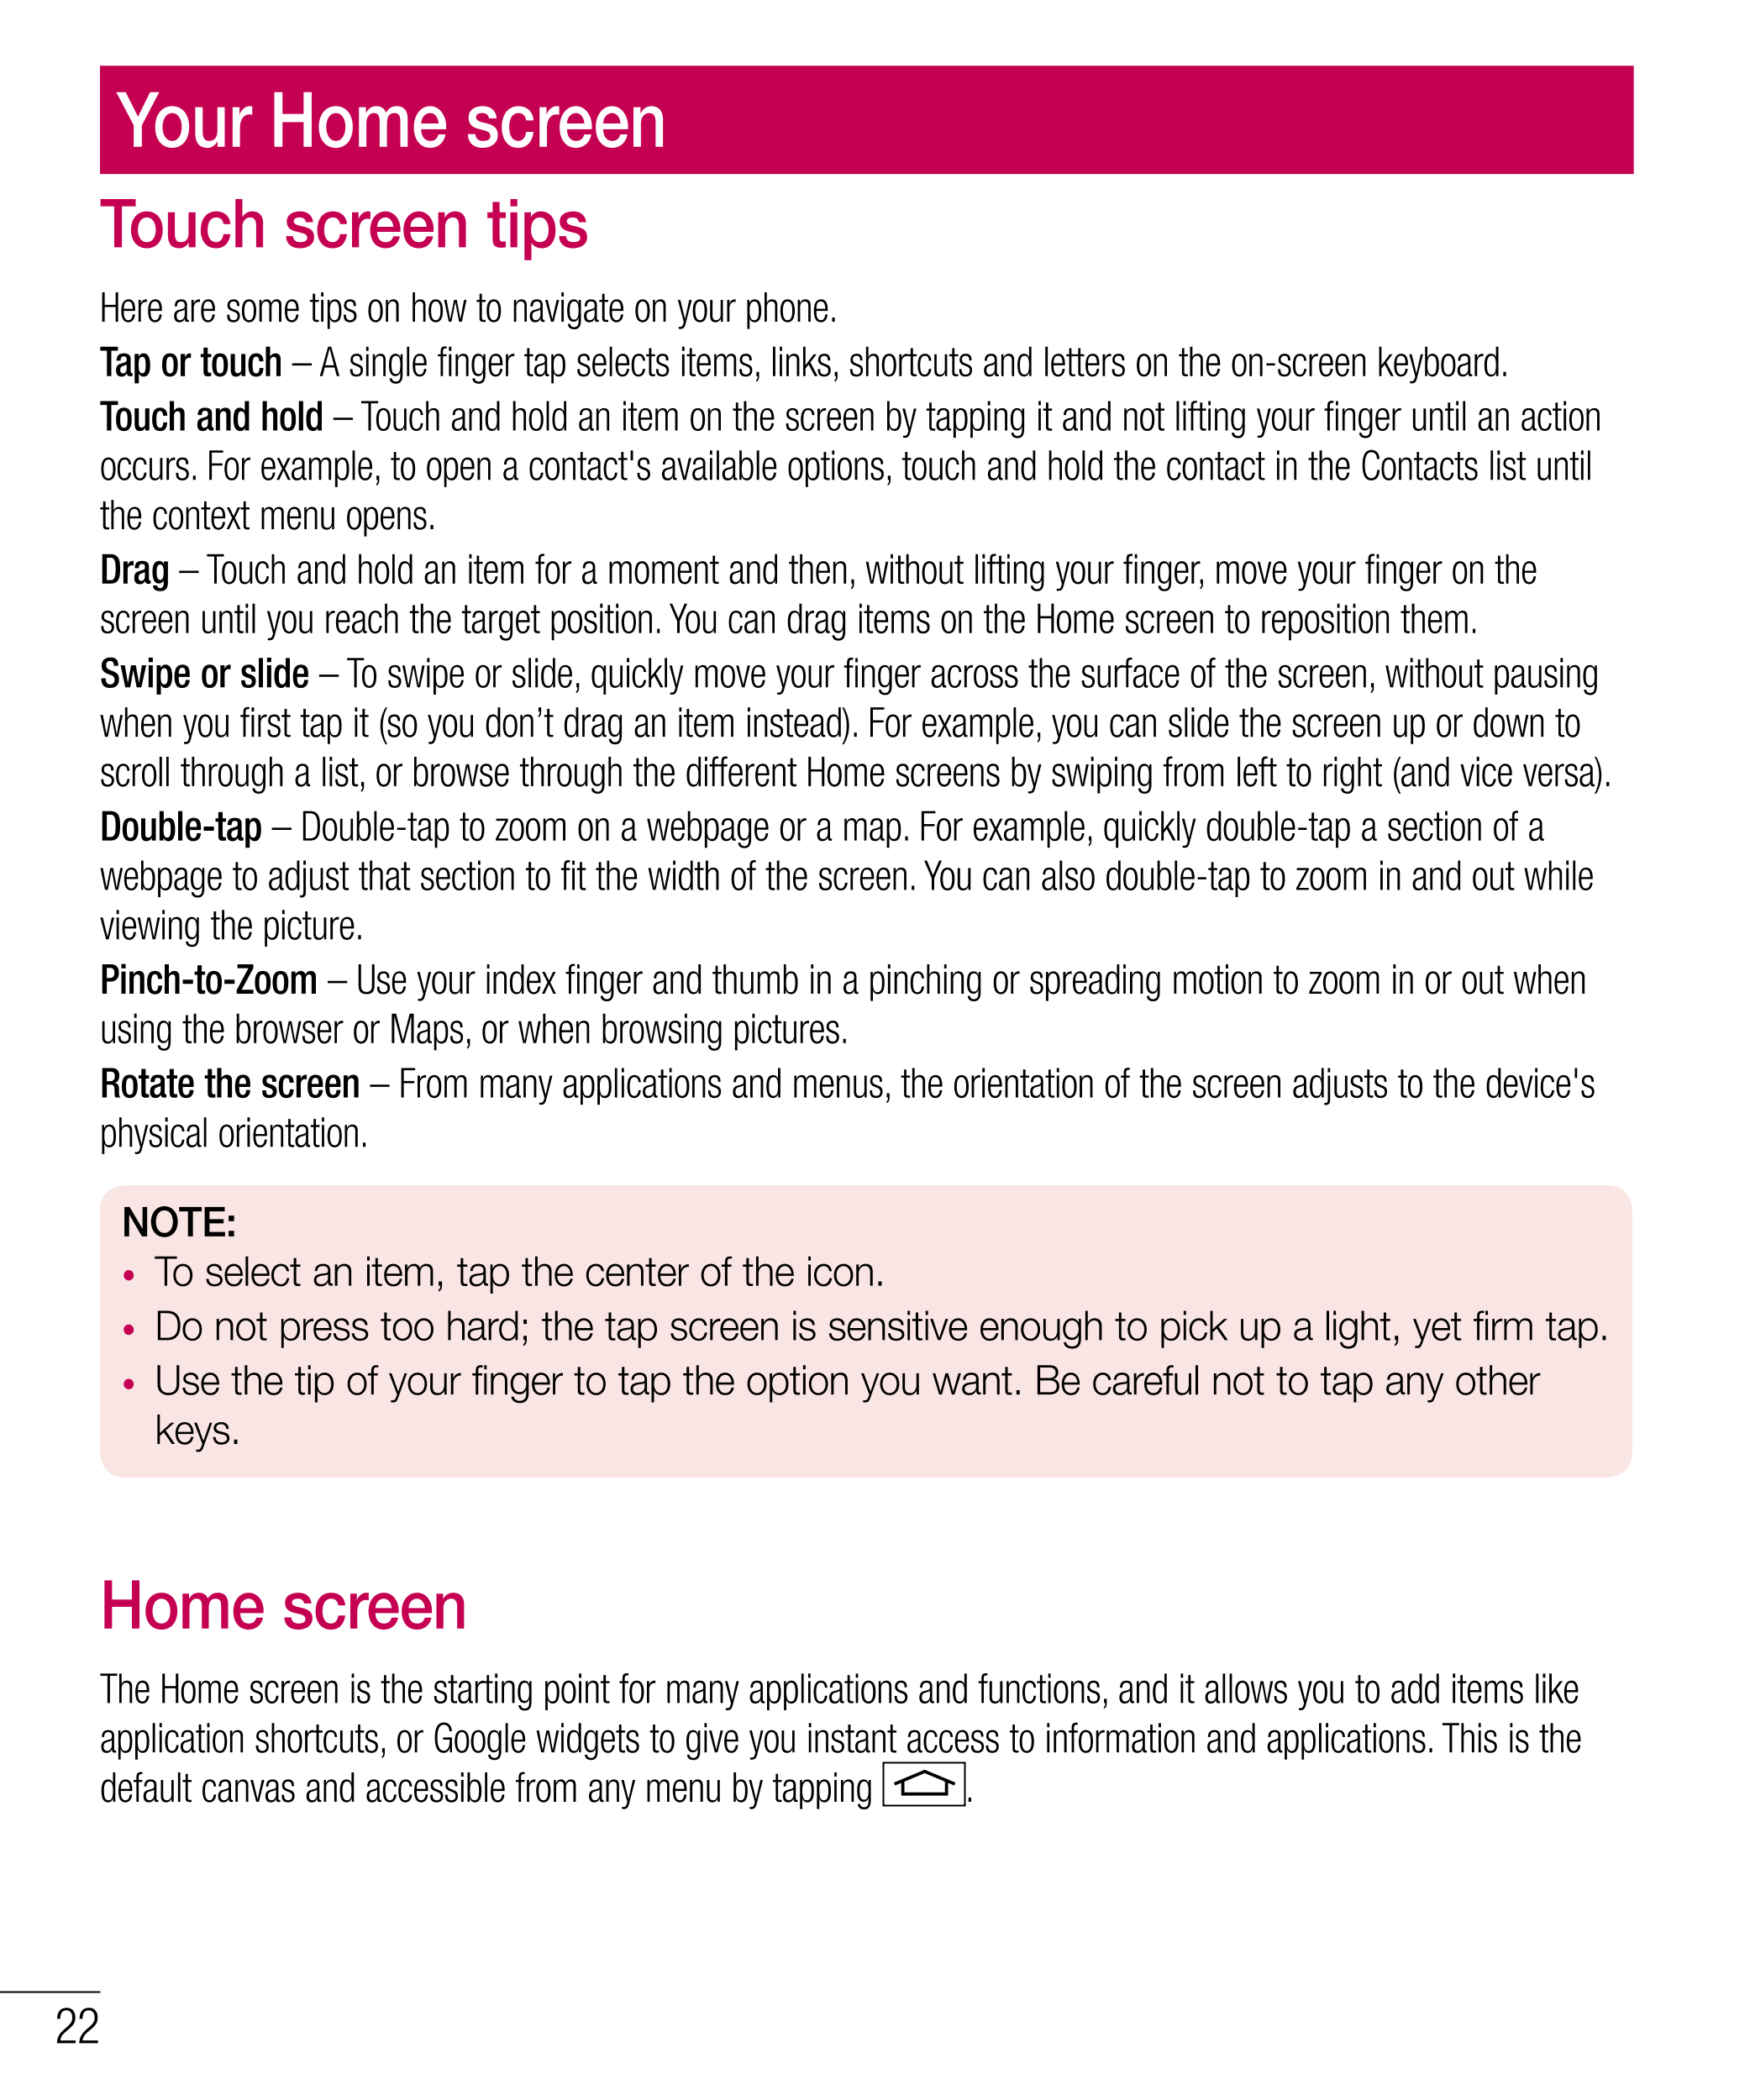 Your Home screen
Touch screen tips
Here are some tips on how to navigate on your phone.
Tap or touch – A single finger tap selec